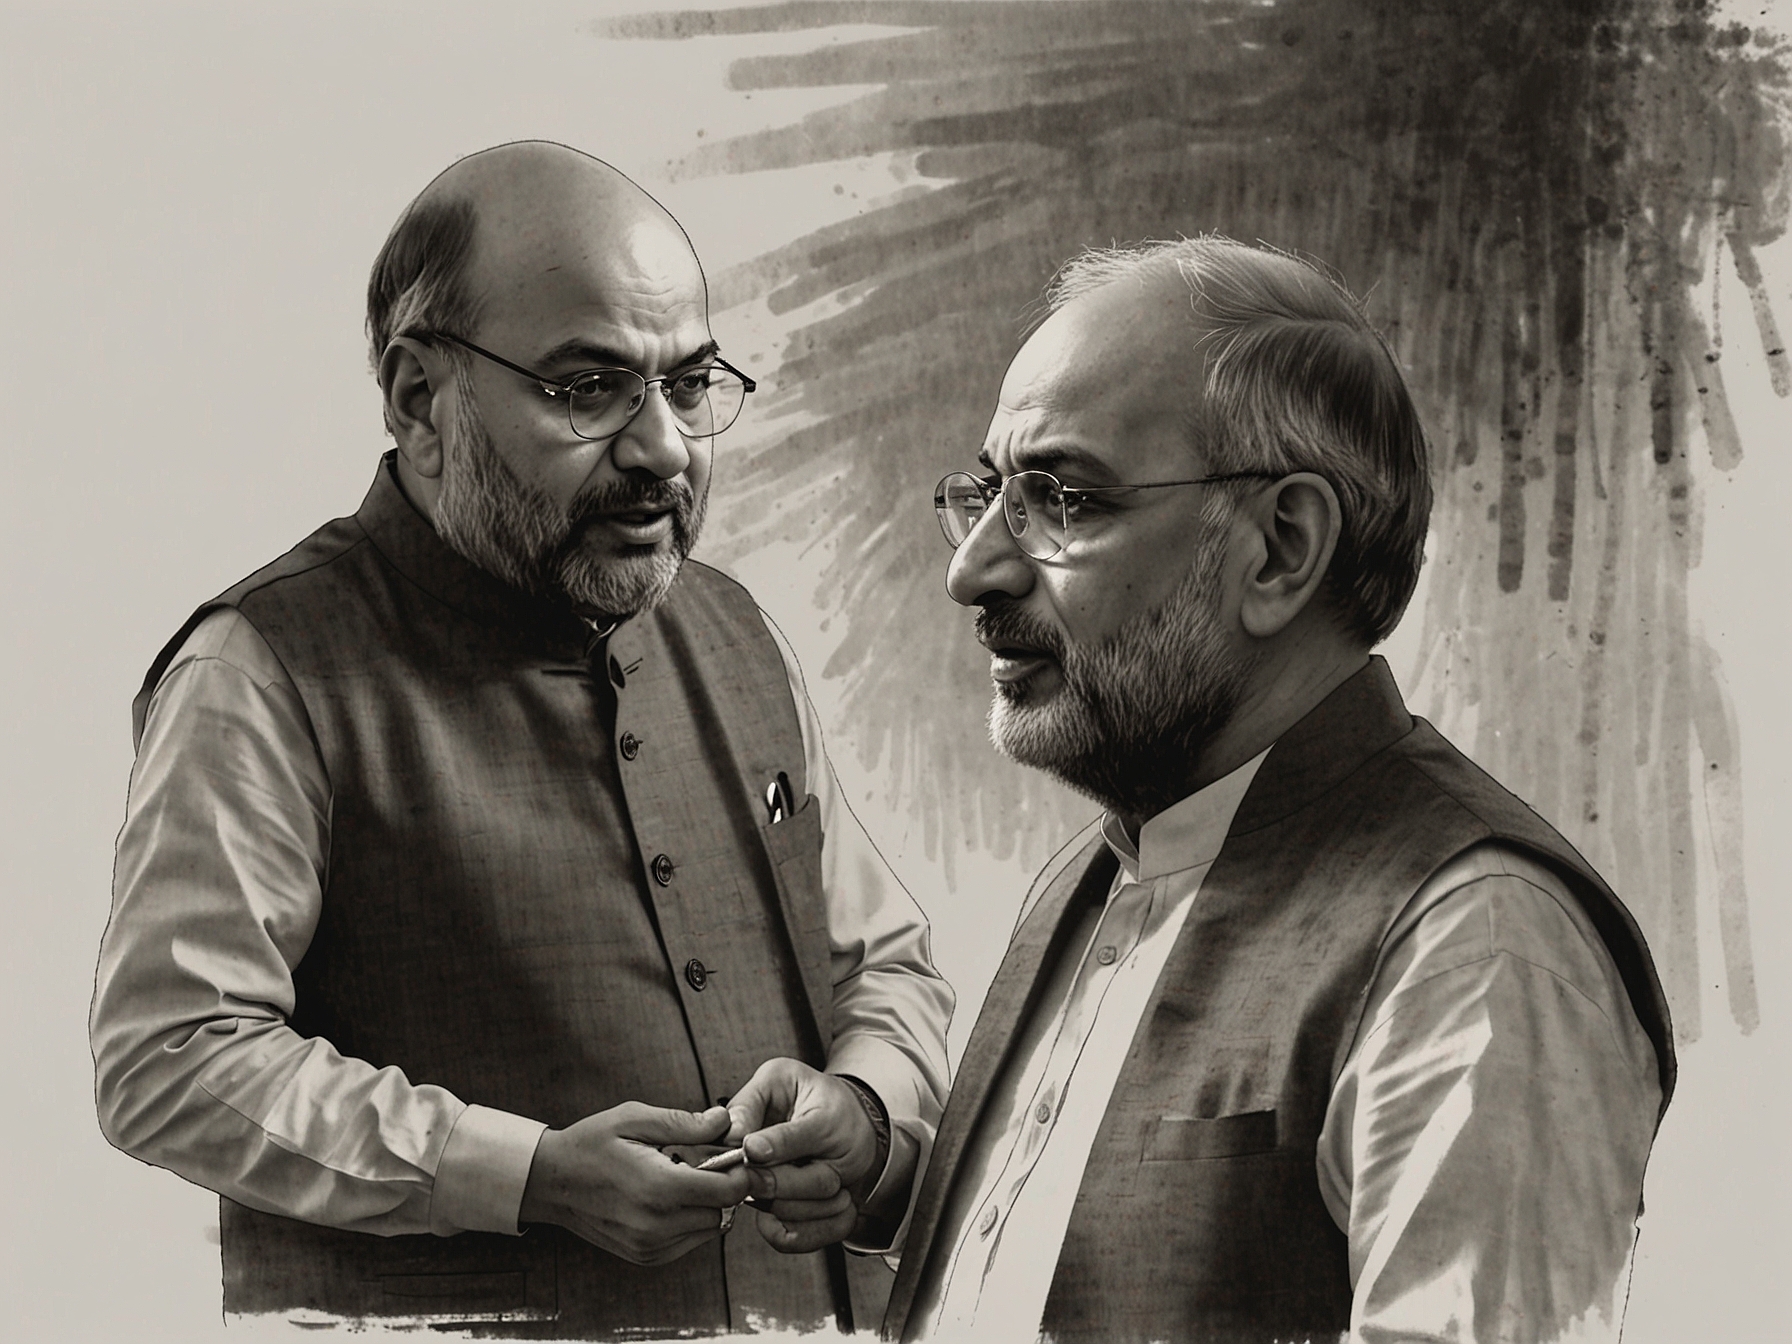 A heated political debate surfaces as Amit Shah critiques Rahul Gandhi's statements, invoking historical events like the Emergency and the Sikh pogrom to bolster BJP's position.